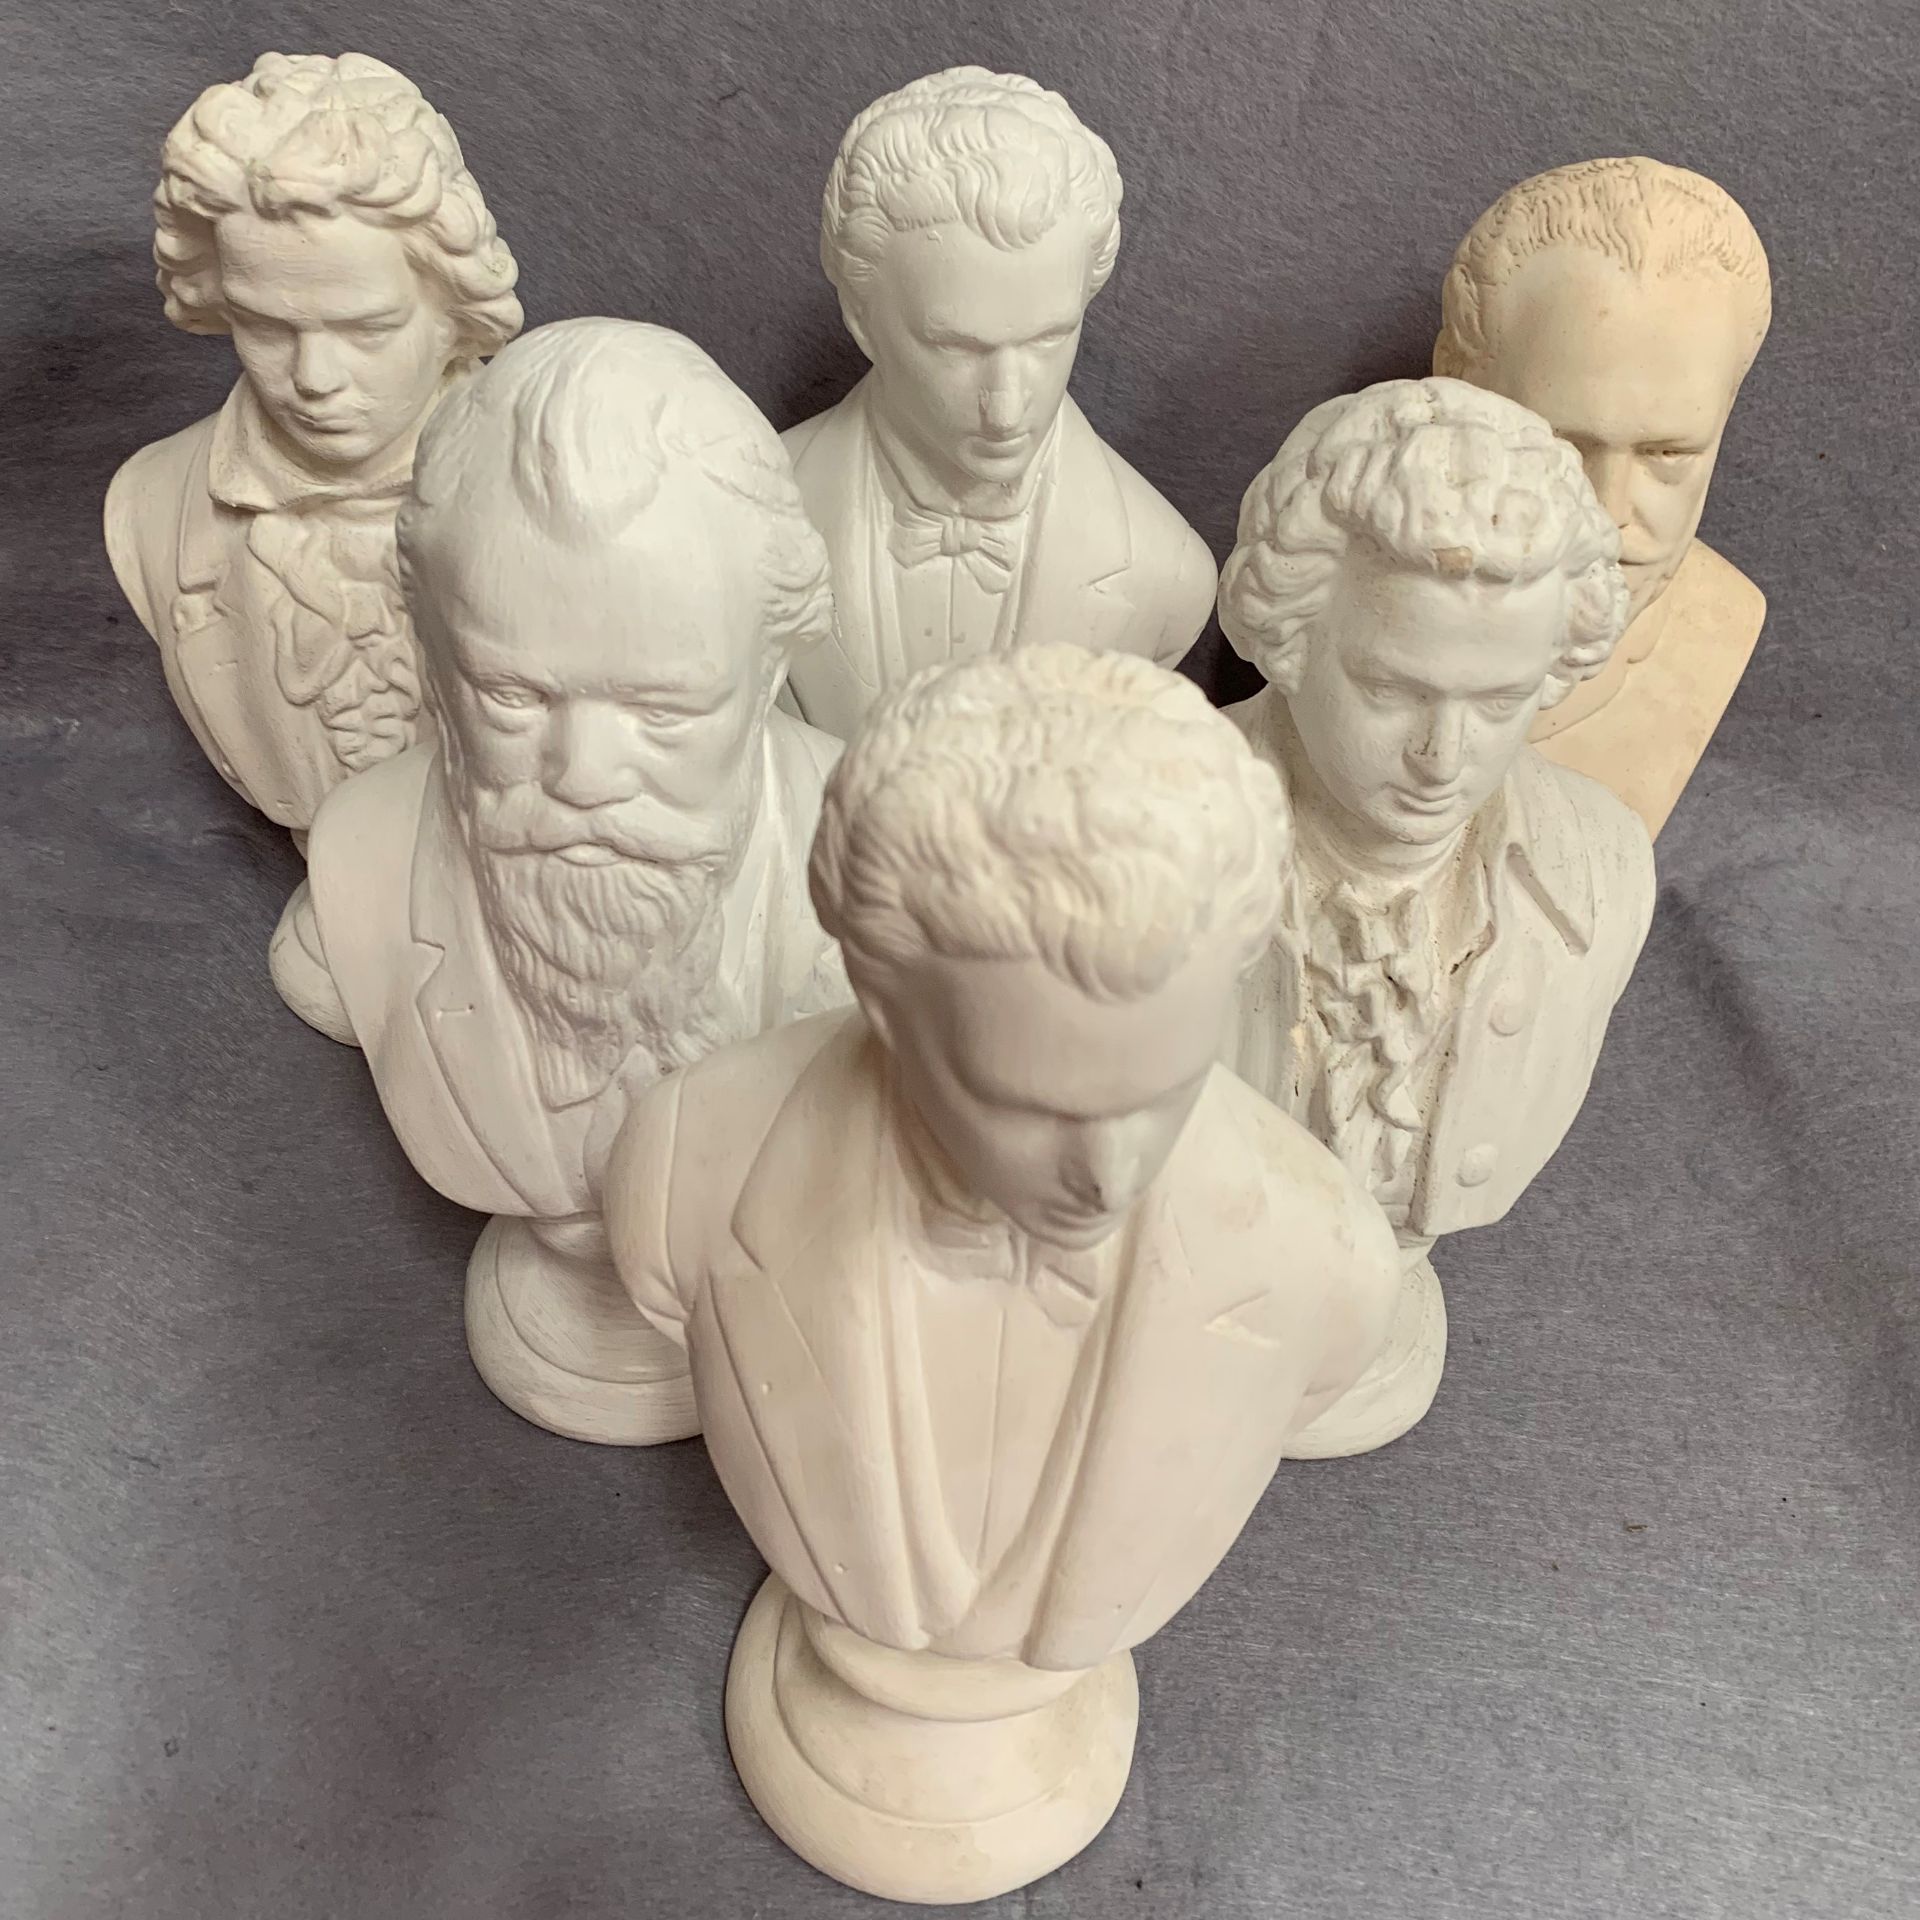 Six plaster busts of composers including Beethoven, Chopin, - Image 3 of 3